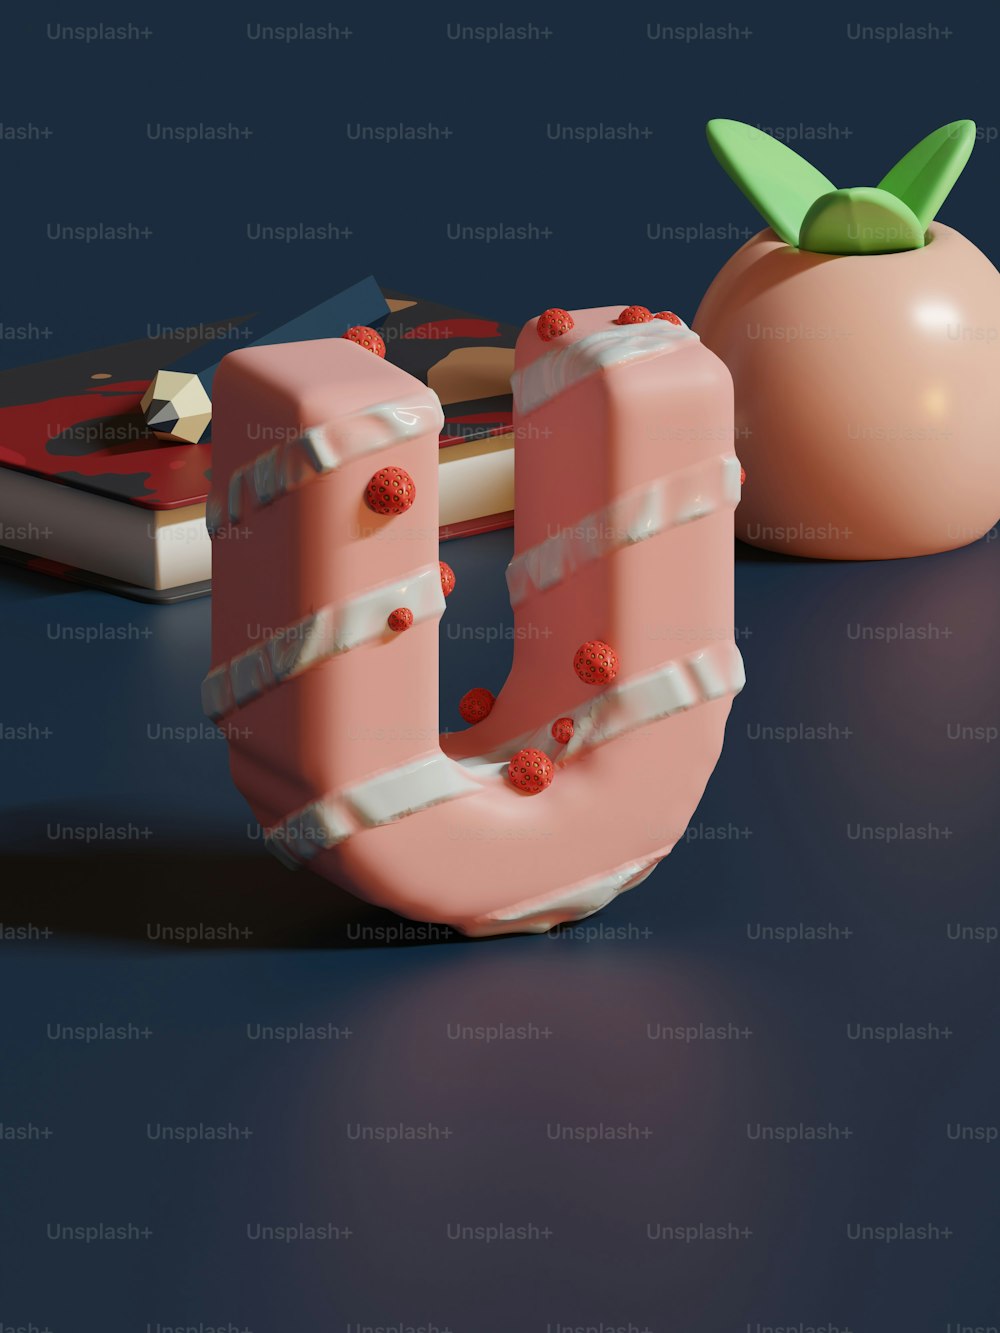 a 3d image of the letter u next to an apple